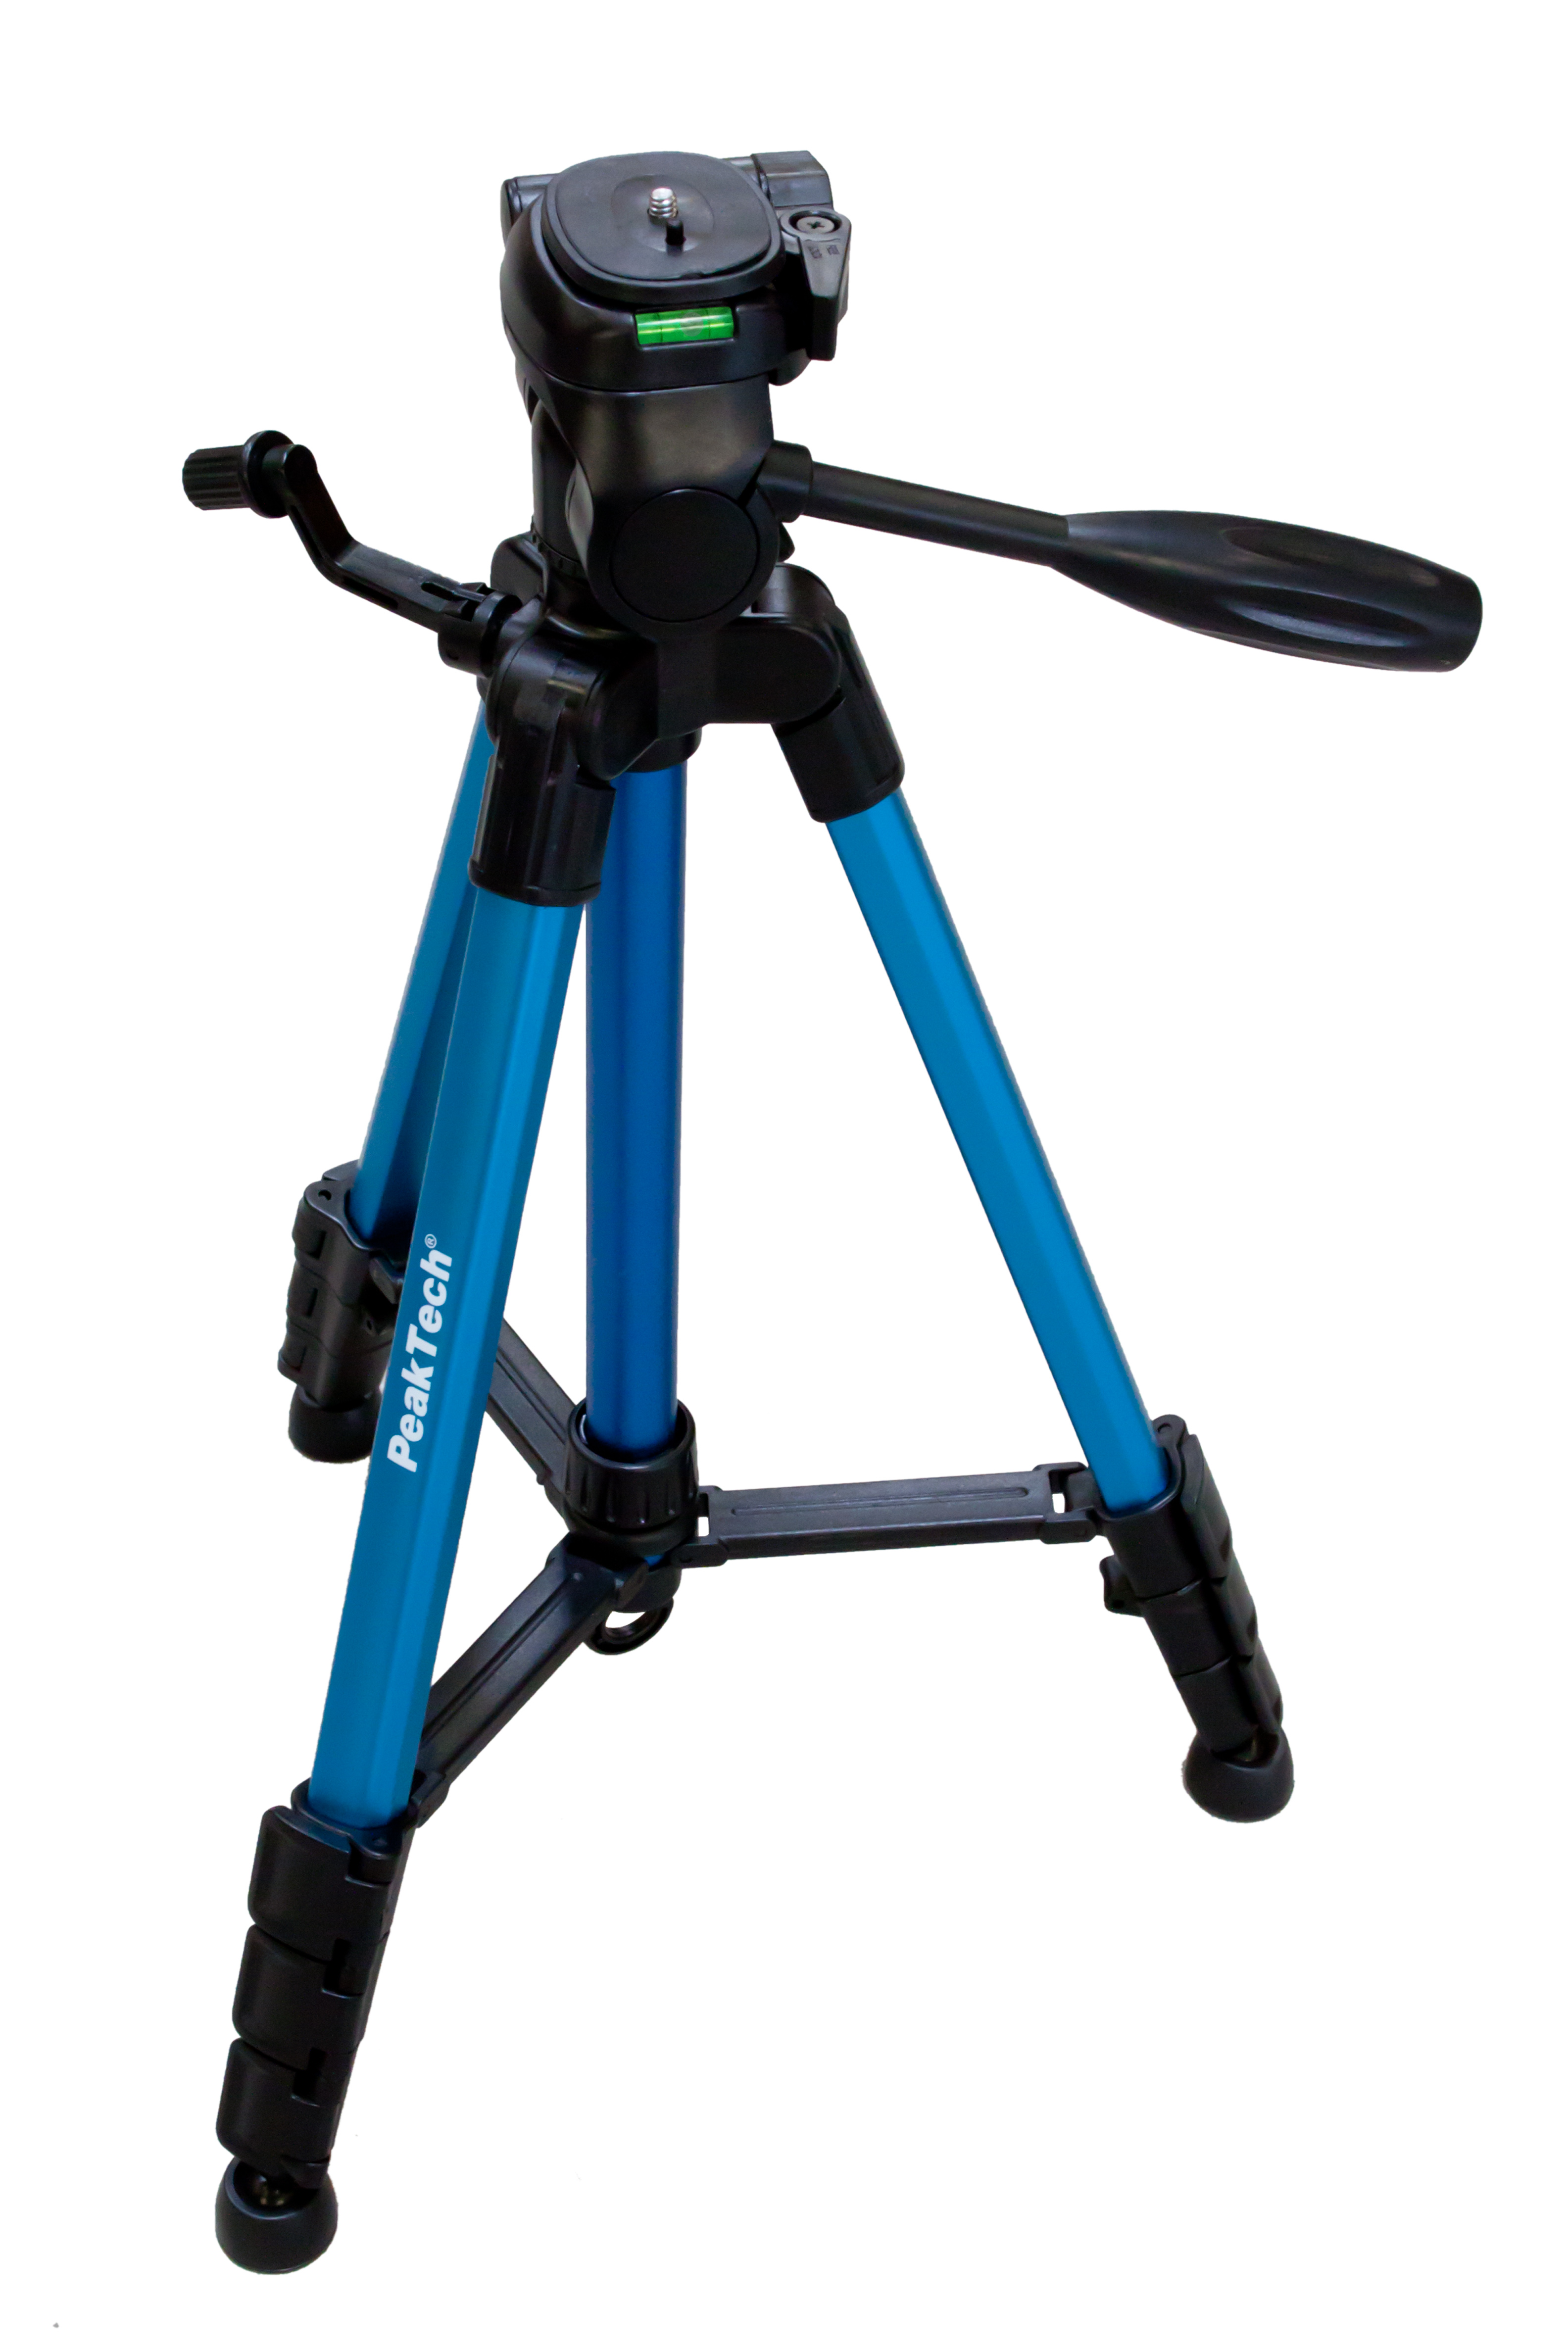 «PeakTech® P 7850» Tripod for cameras and measurement devices